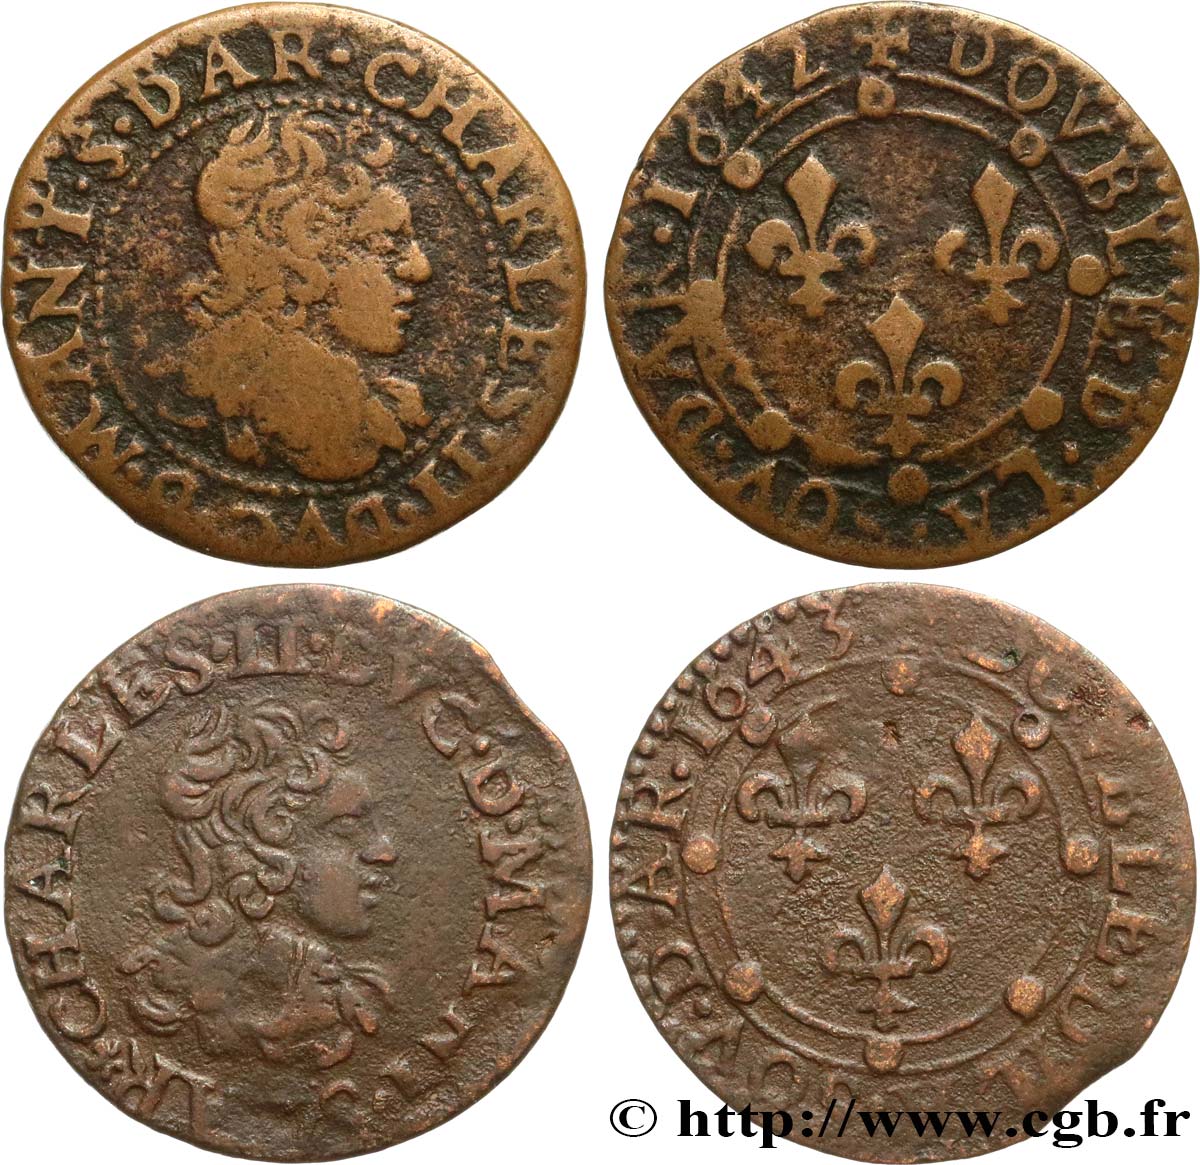 ARDENNES - PRINCIPAUTY OF ARCHES-CHARLEVILLE - CHARLES II OF GONZAGUE Lot de 2 double tournois VF/XF